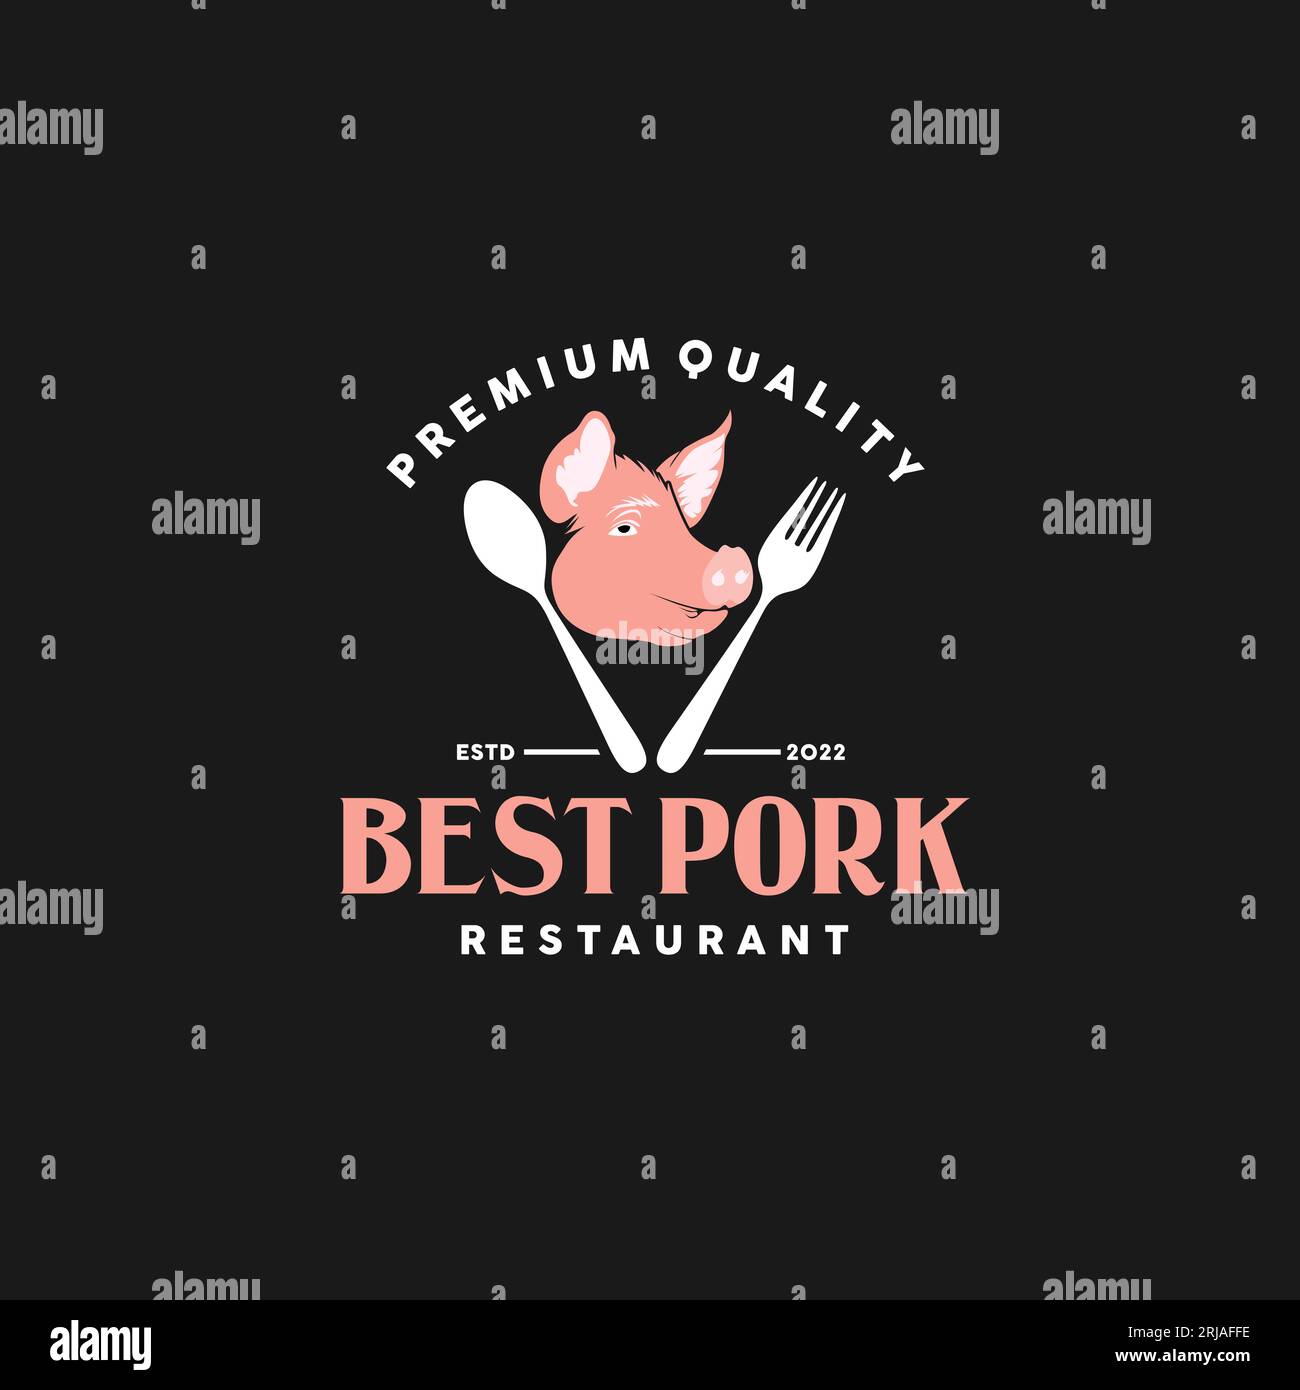 Pork Restaurant Logo With Pig Head And Cutlery Icon Design Inspiration Stock Vector